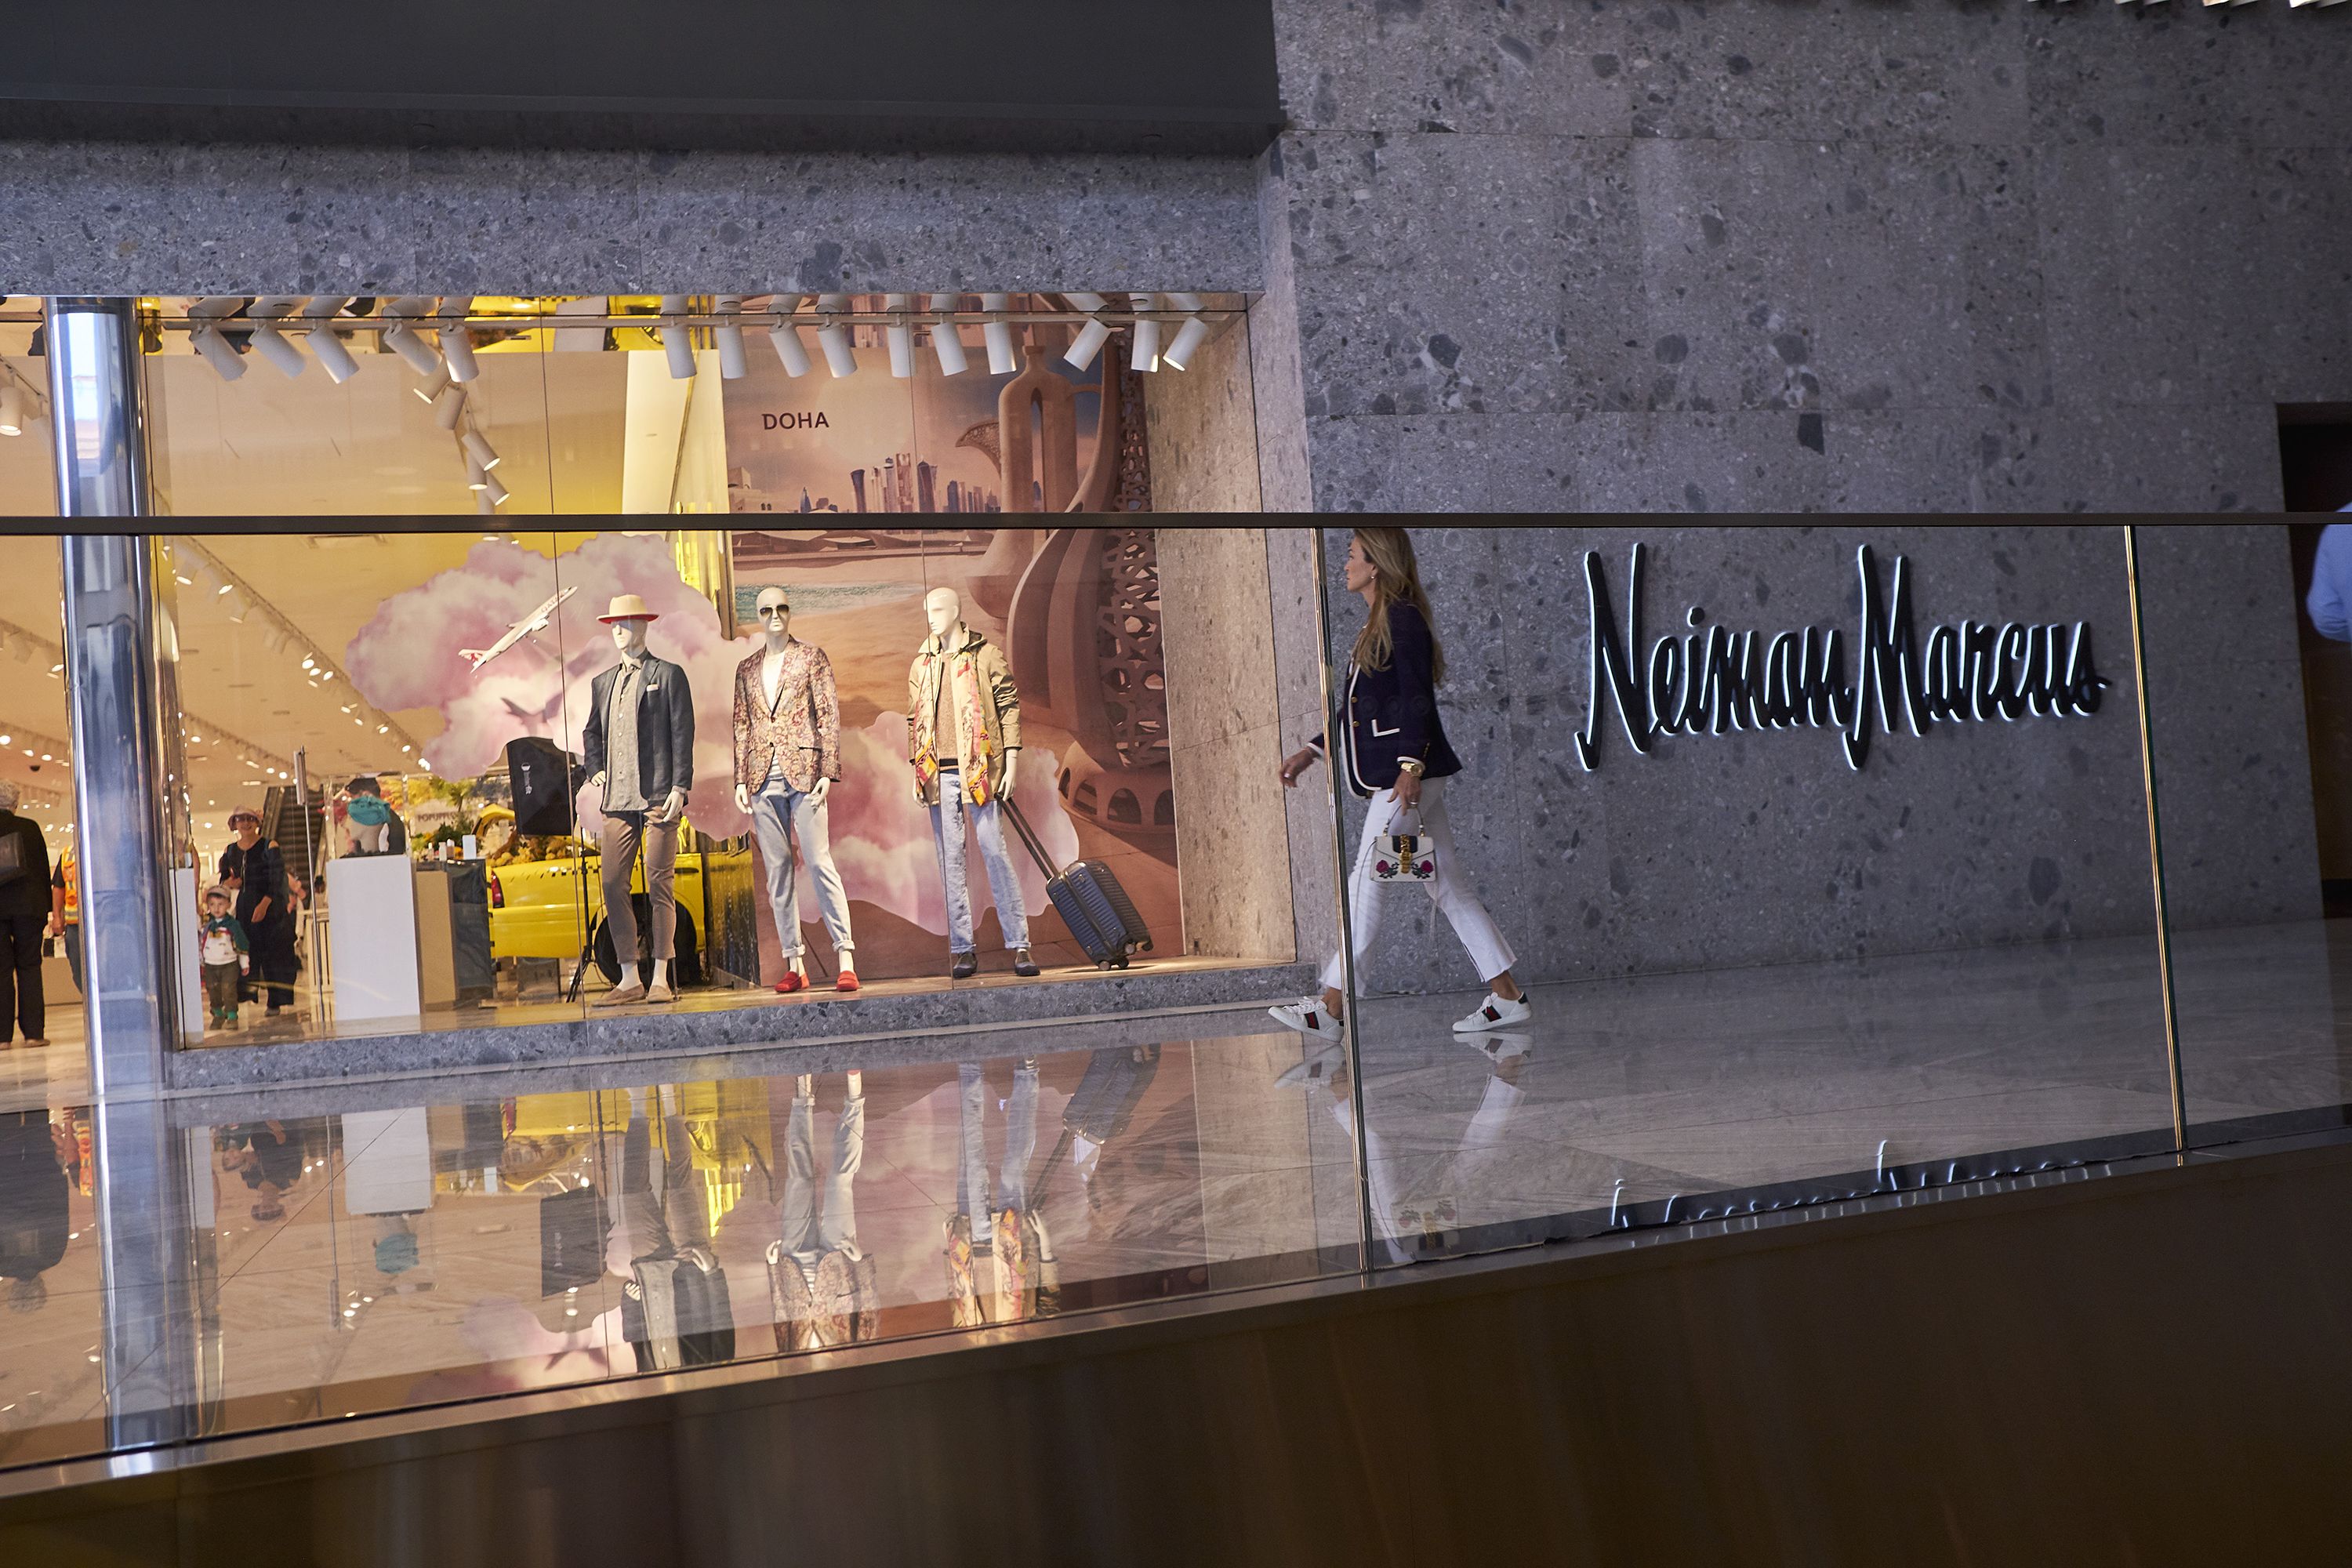 With Neiman Marcus filing for bankruptcy, its resale investment is in  jeopardy - Glossy